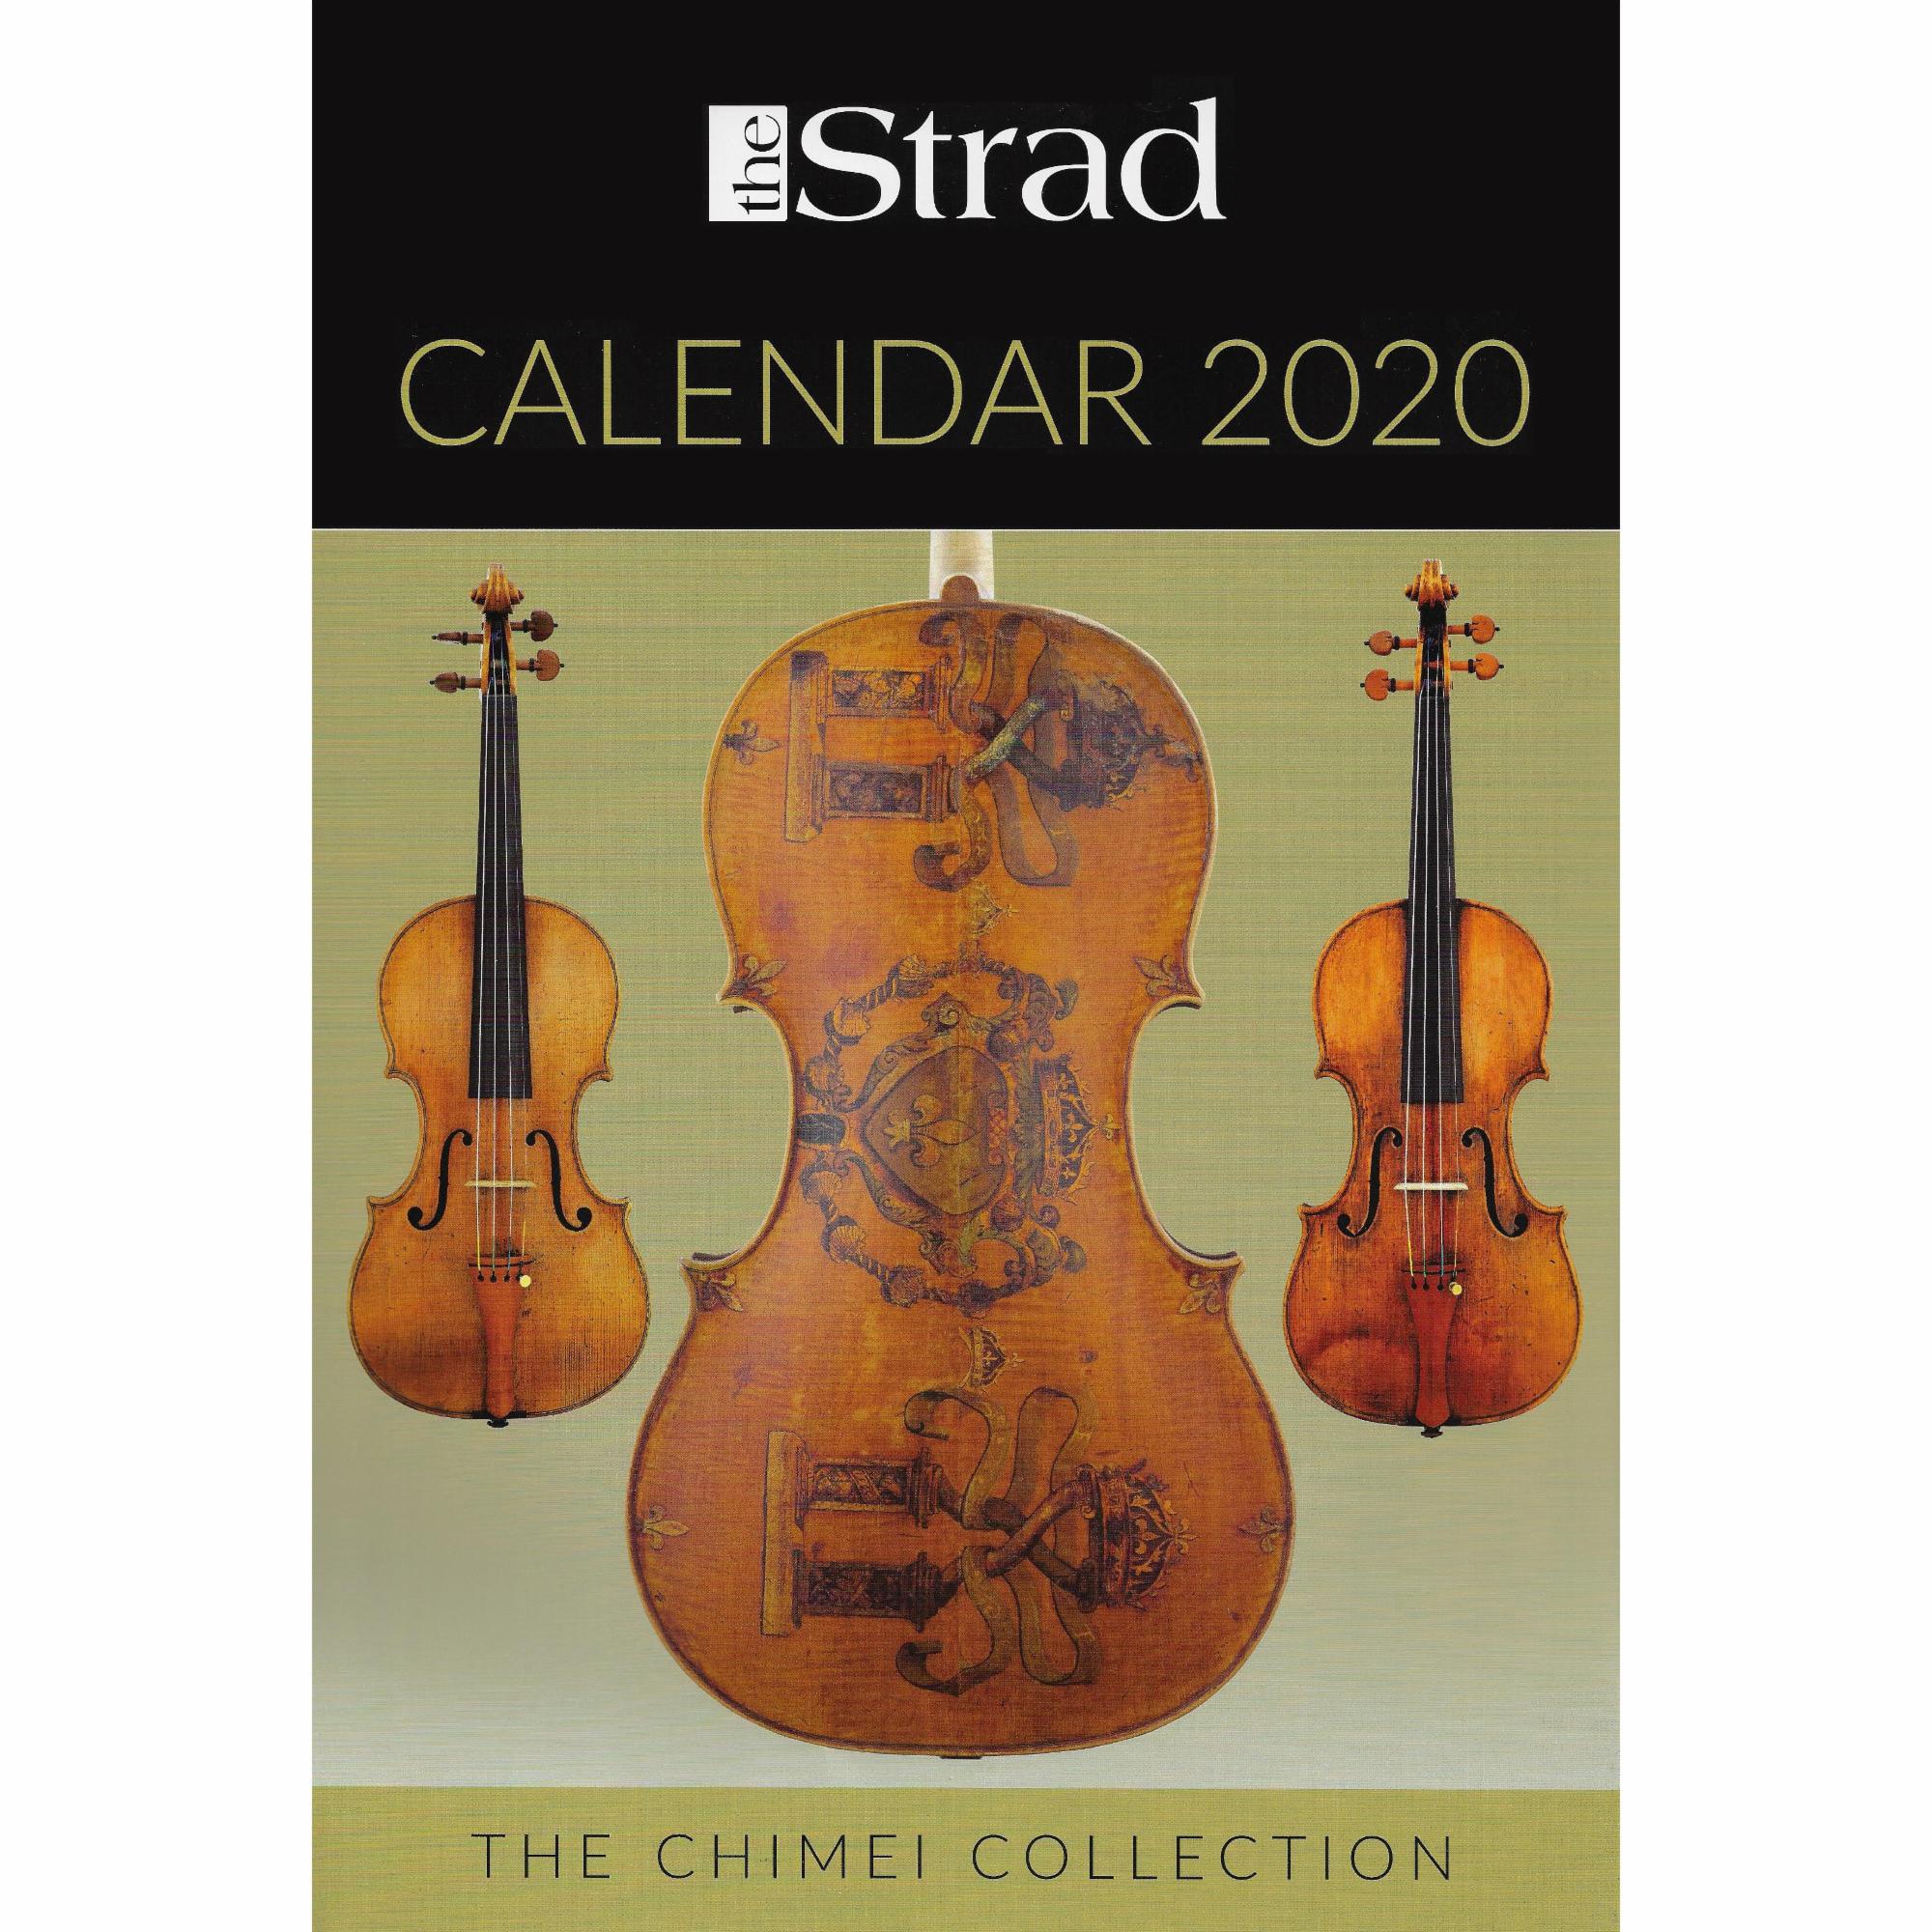 The Strad Calender 2020